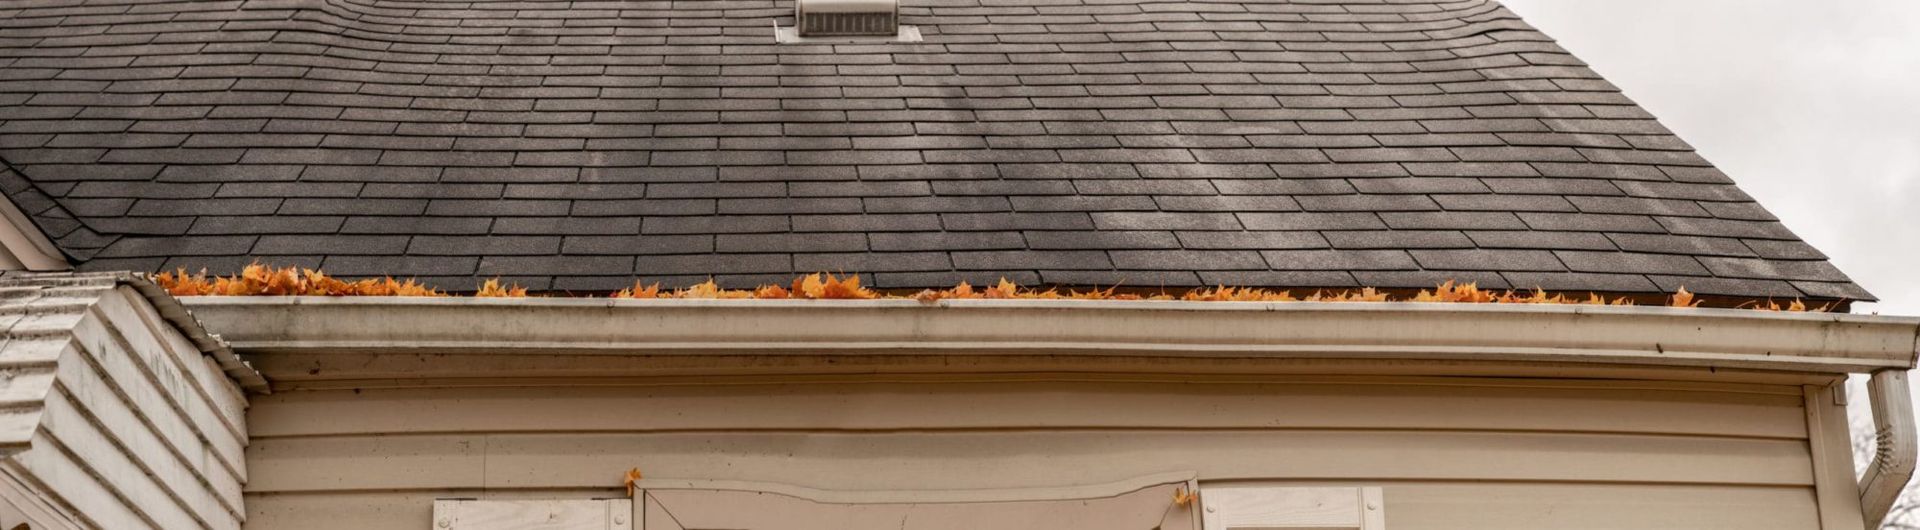 Professional Gutter cleaning servcies for hire